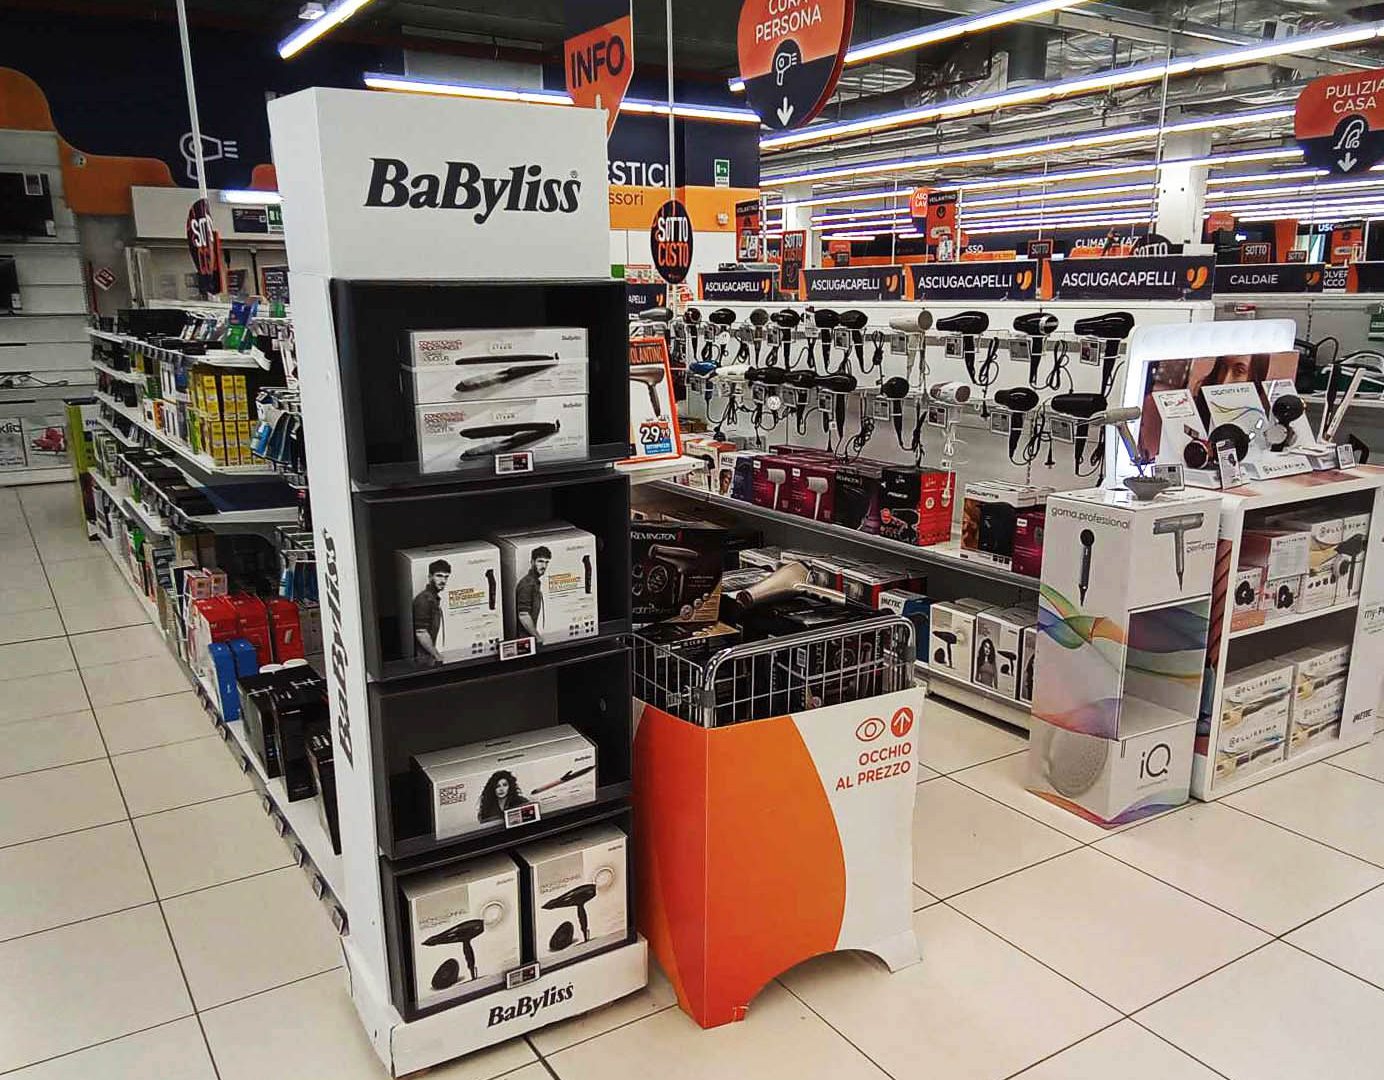 Babyliss Field Marketing Services Pardgroup